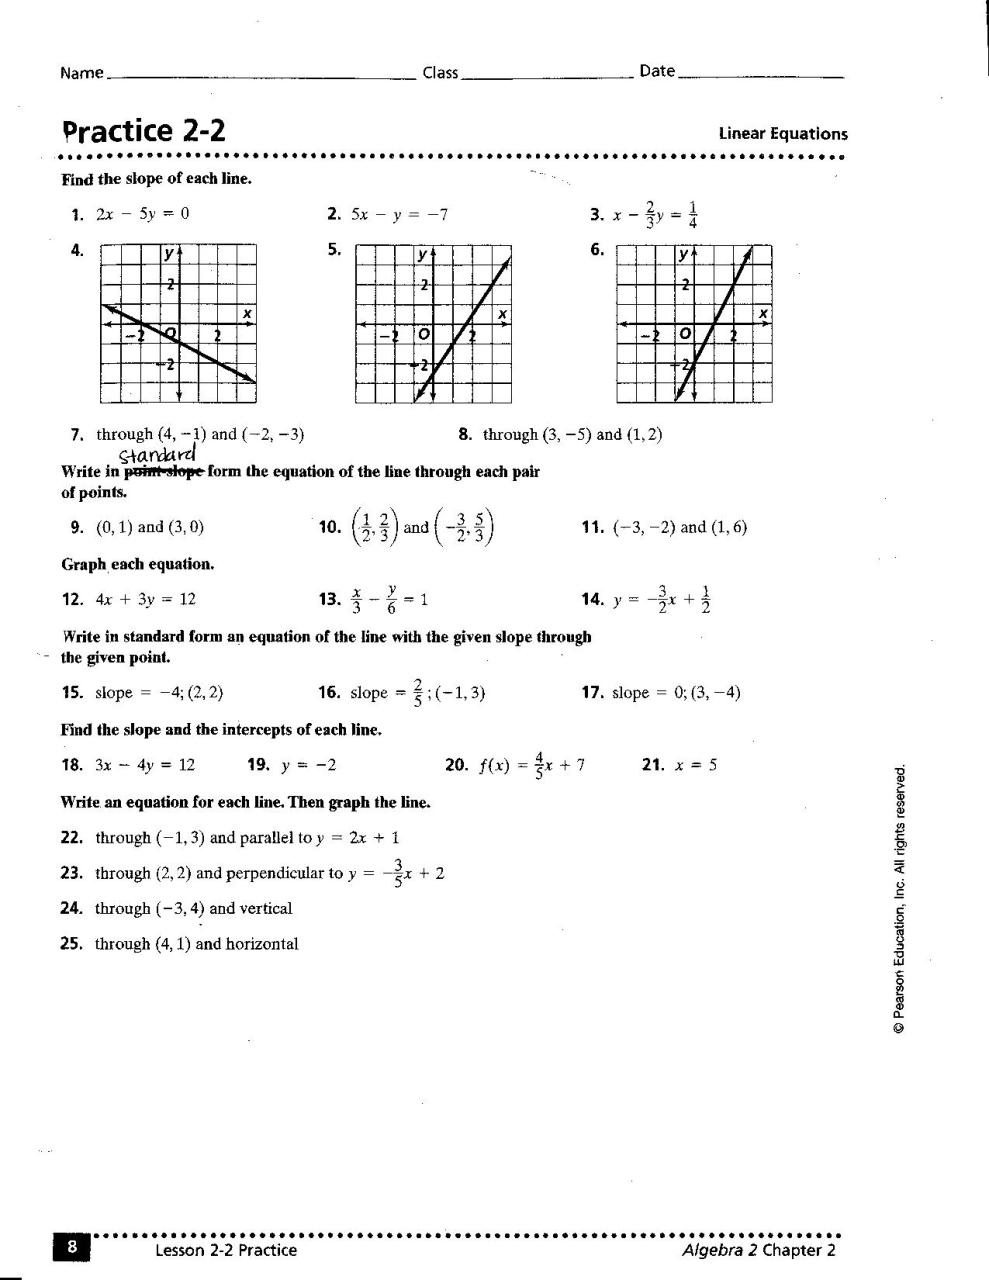 Solving Linear Equations Worksheet 1 Answers solving linear equations